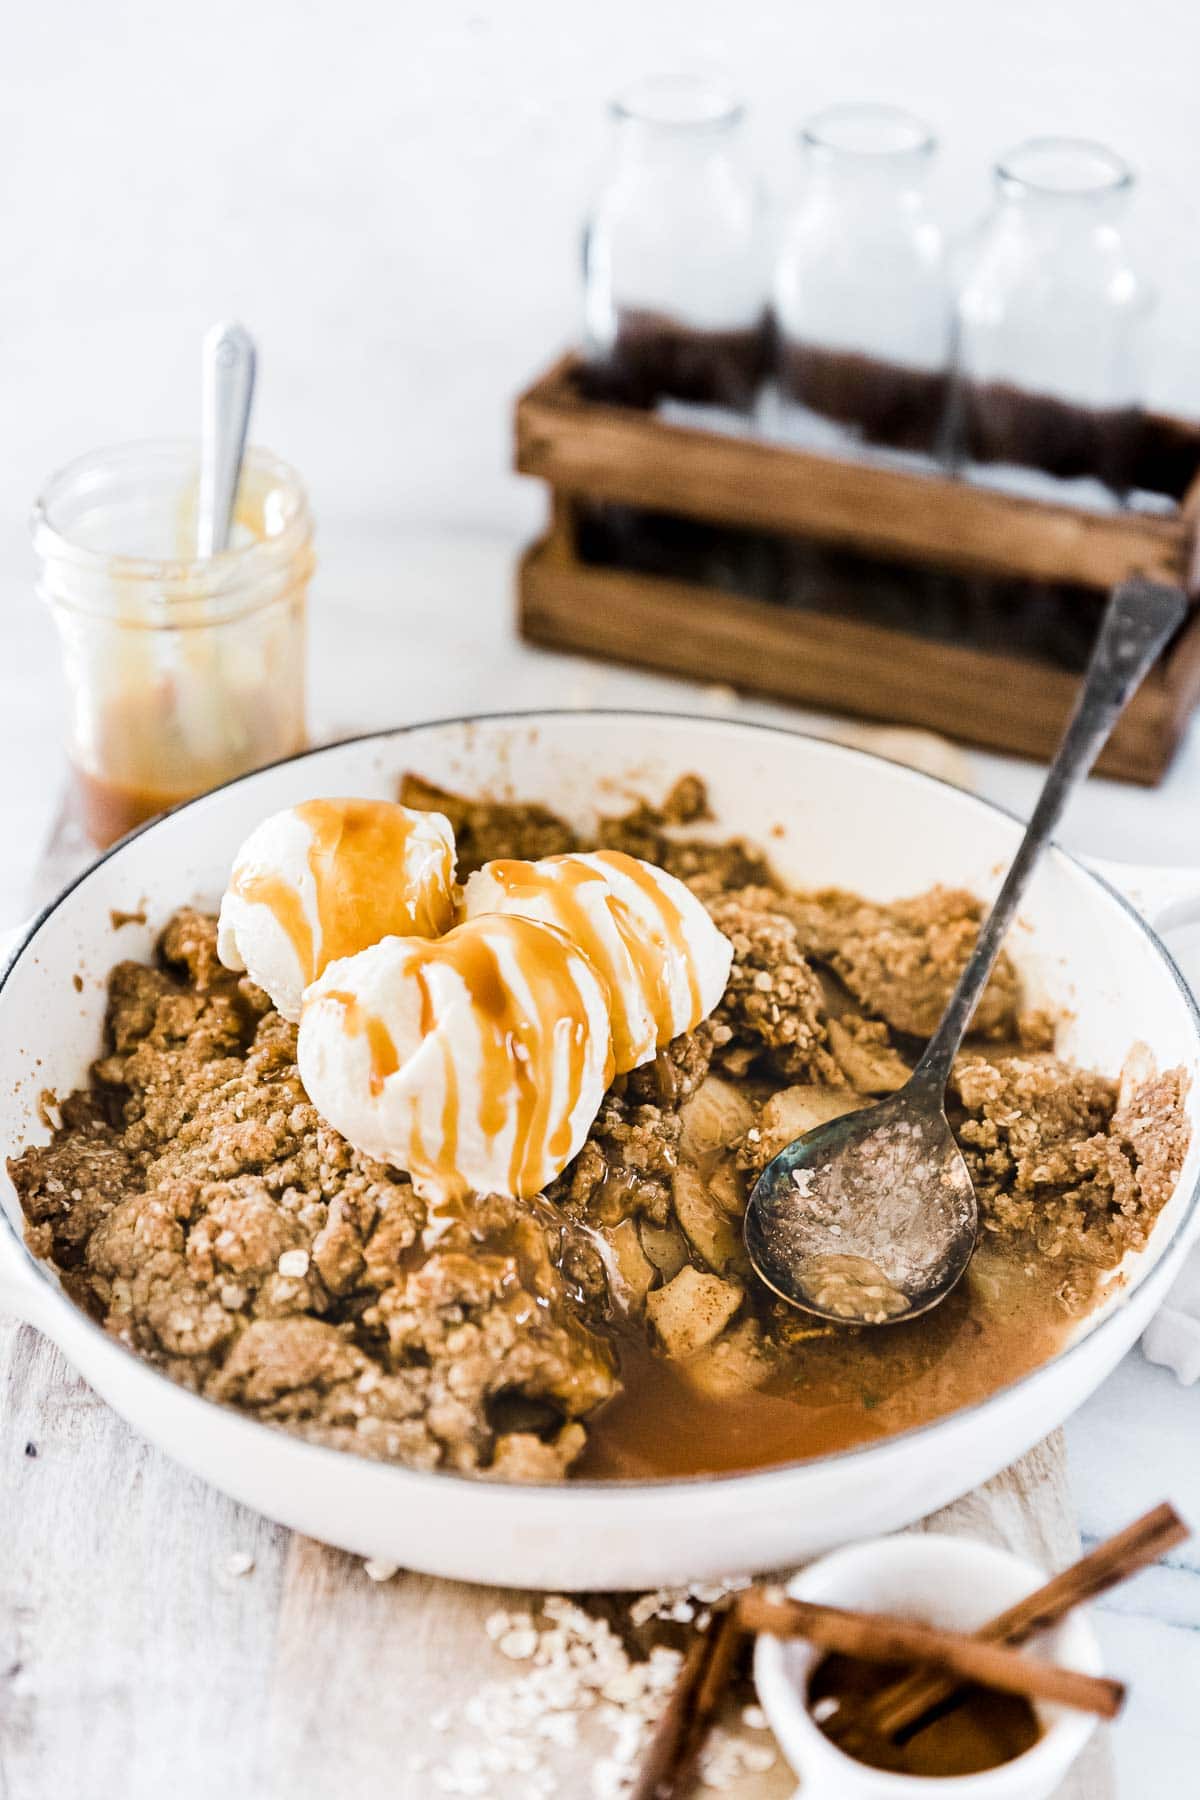 Caramel apple crisp in a white braiser, topped with ice cream. There are glass bottles in the background.